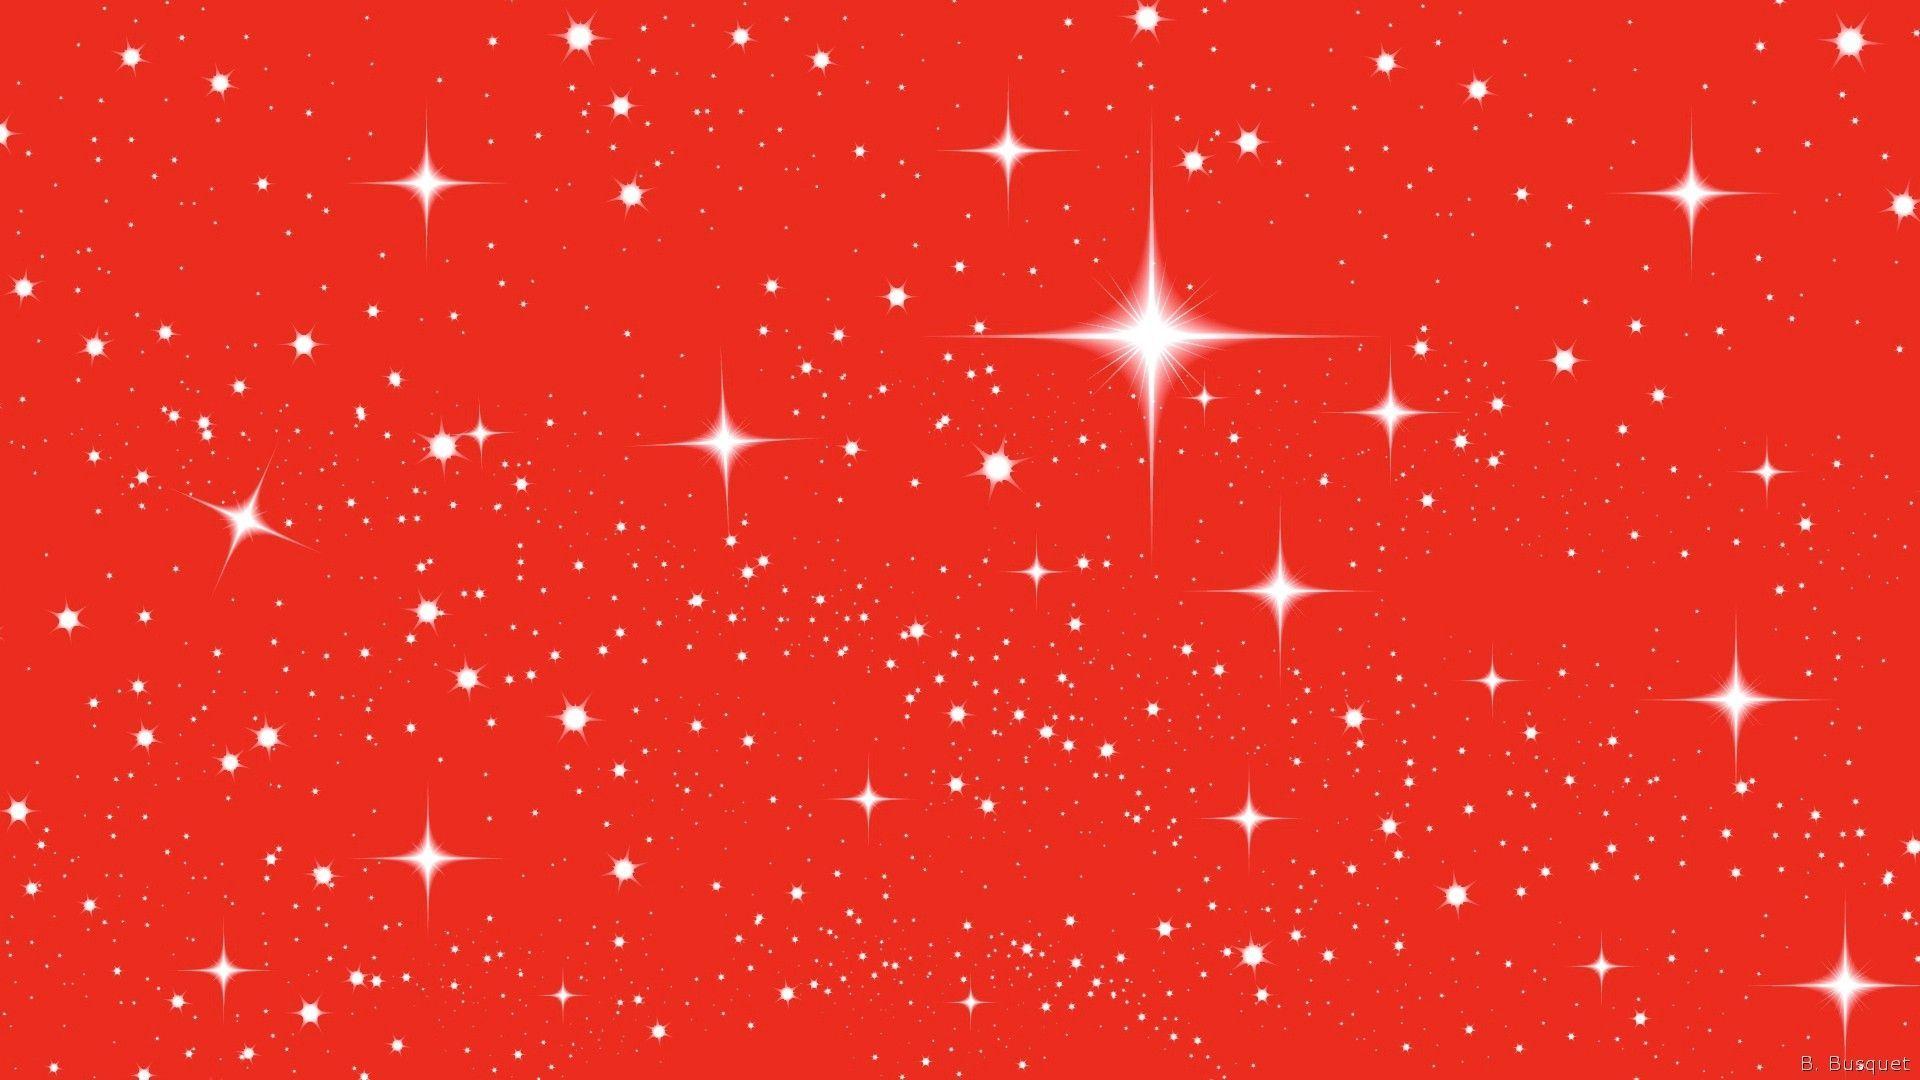 red star 1080P 2k 4k HD wallpapers backgrounds free download  Rare  Gallery